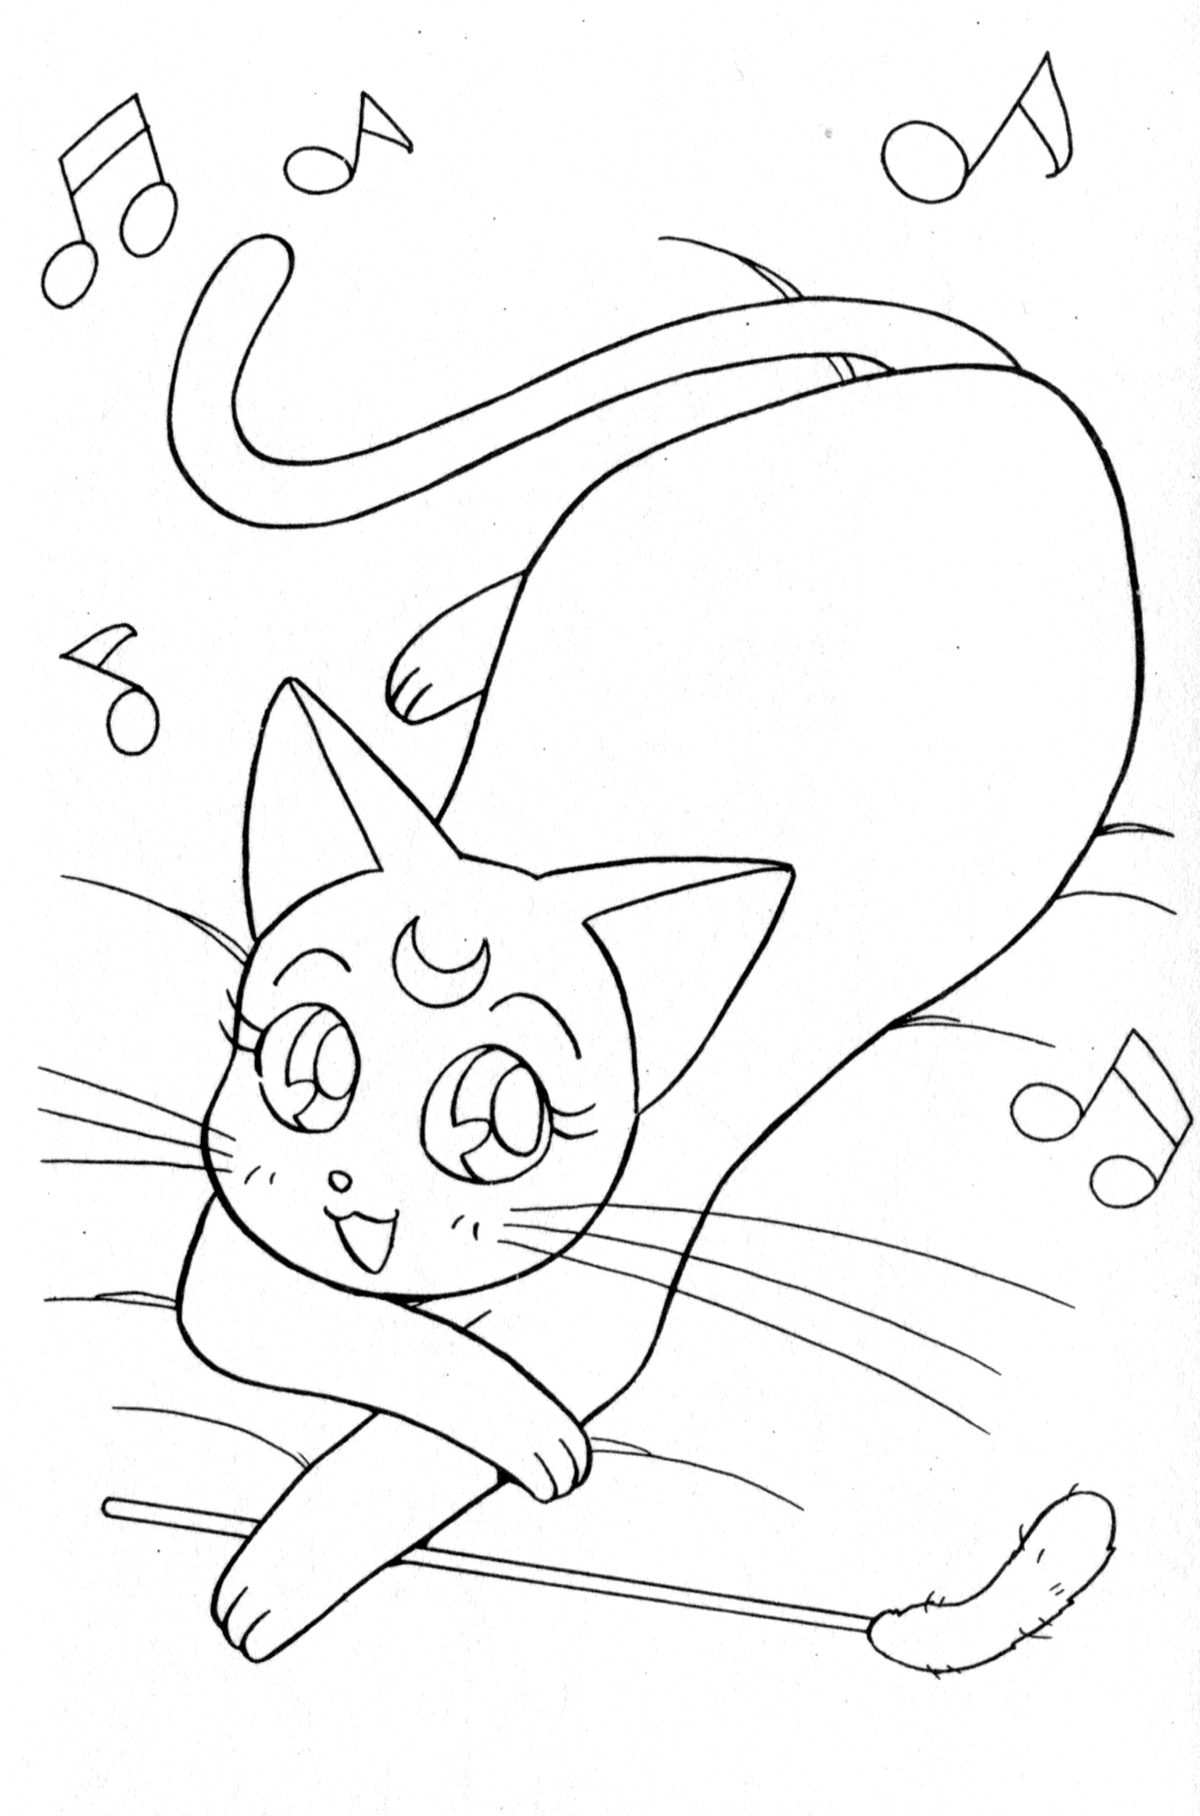 cats006.jpg (1200×1816) | Sailor moon coloring pages, Sailor moon cat